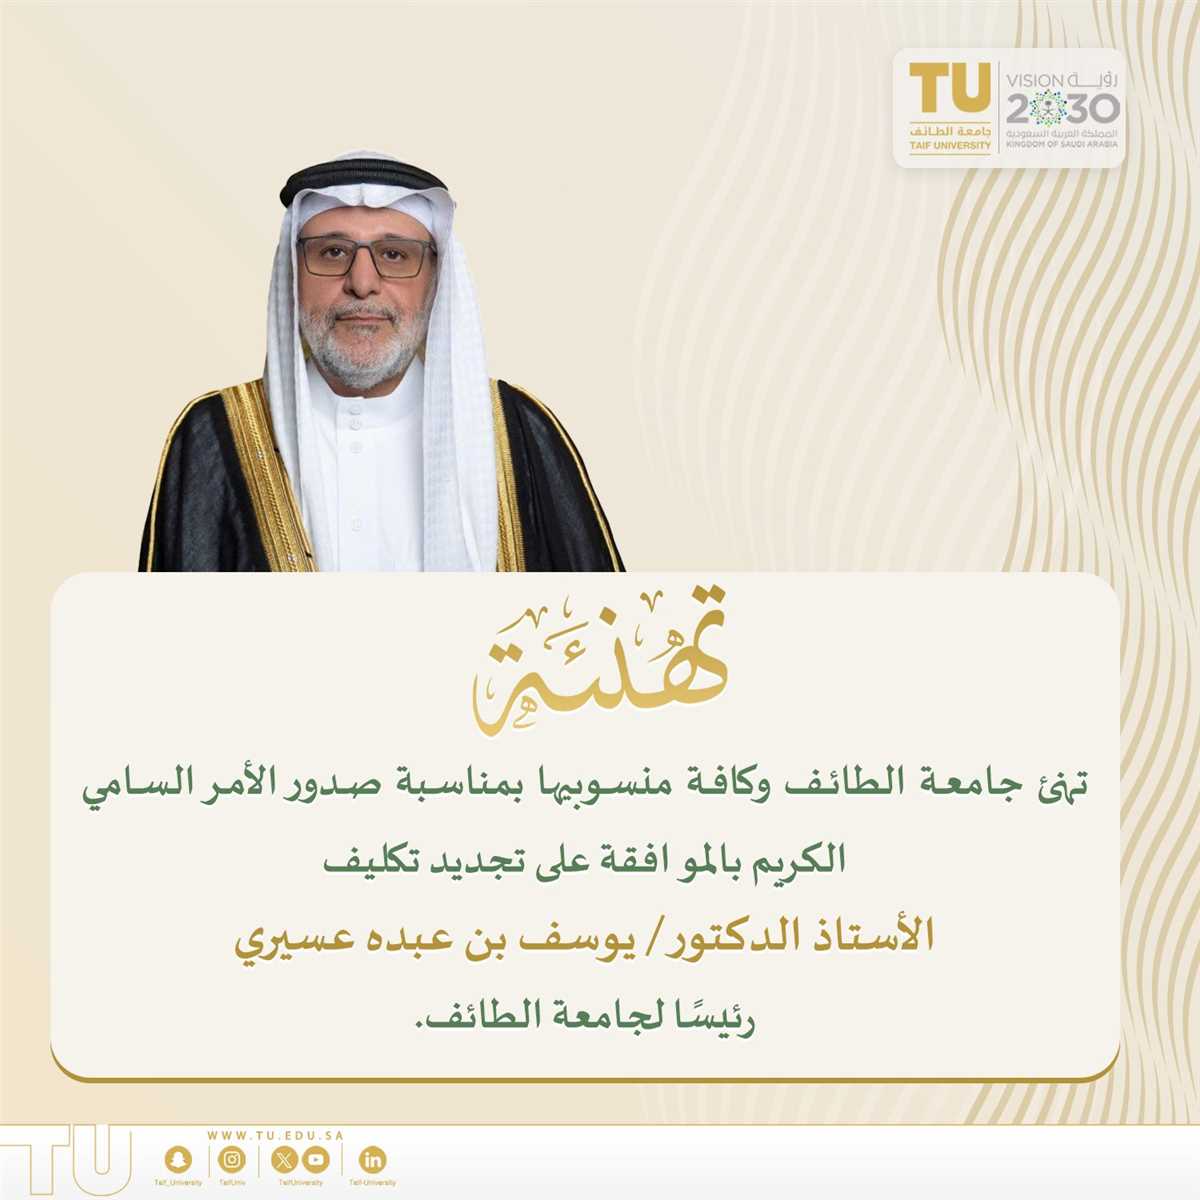 Reappointment of Prof. Yousef bin Abdo Asiri, President of Taif University